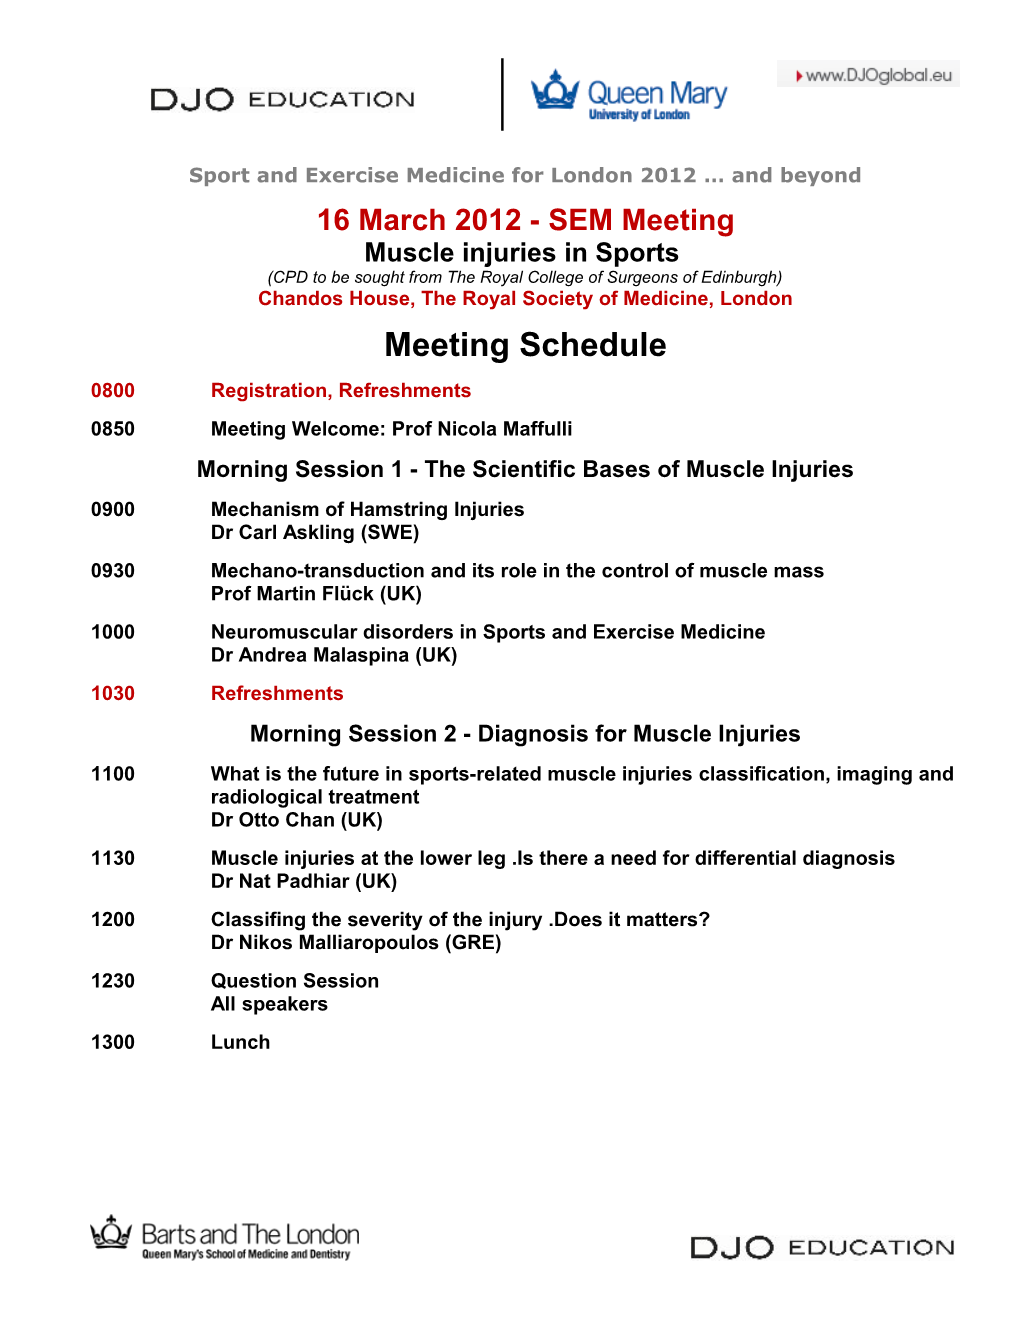 Sport and Exercise Medicine for London 2012 and Beyond